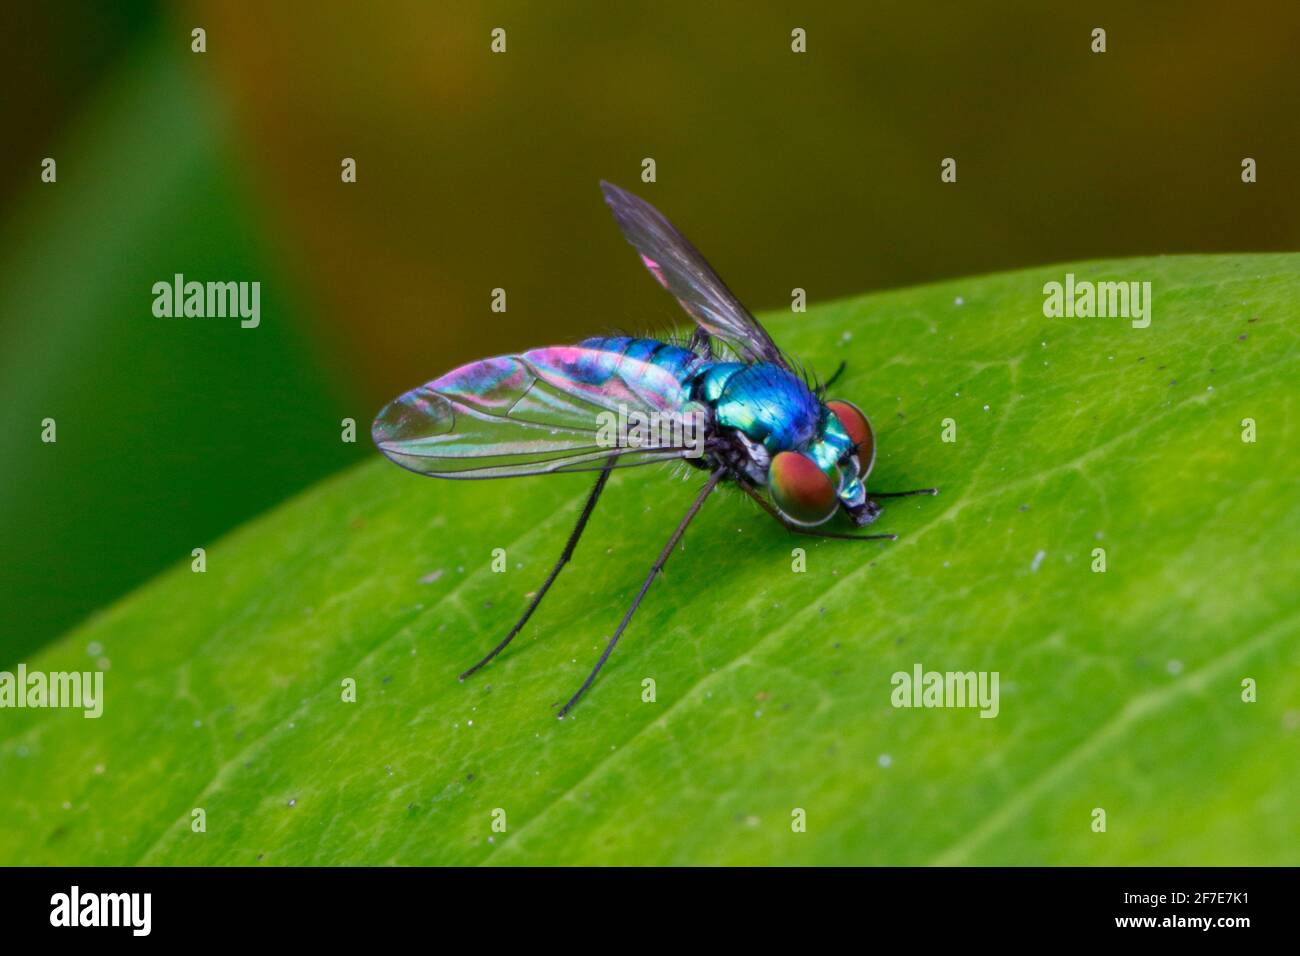 A long legged fly foraging. Stock Photo